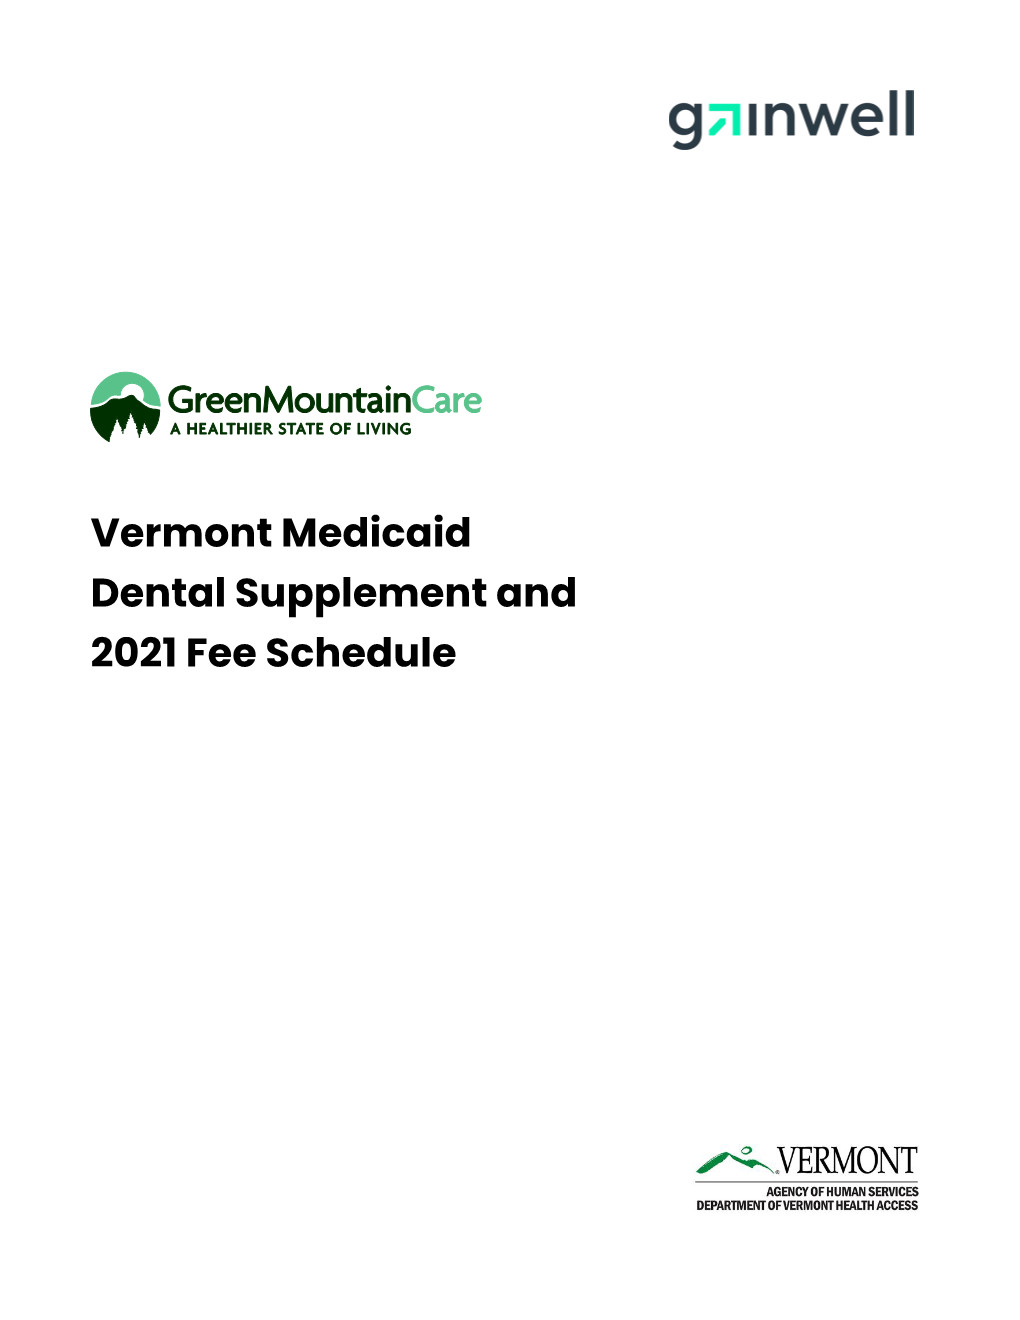 Dental Supplement and Fee Schedule